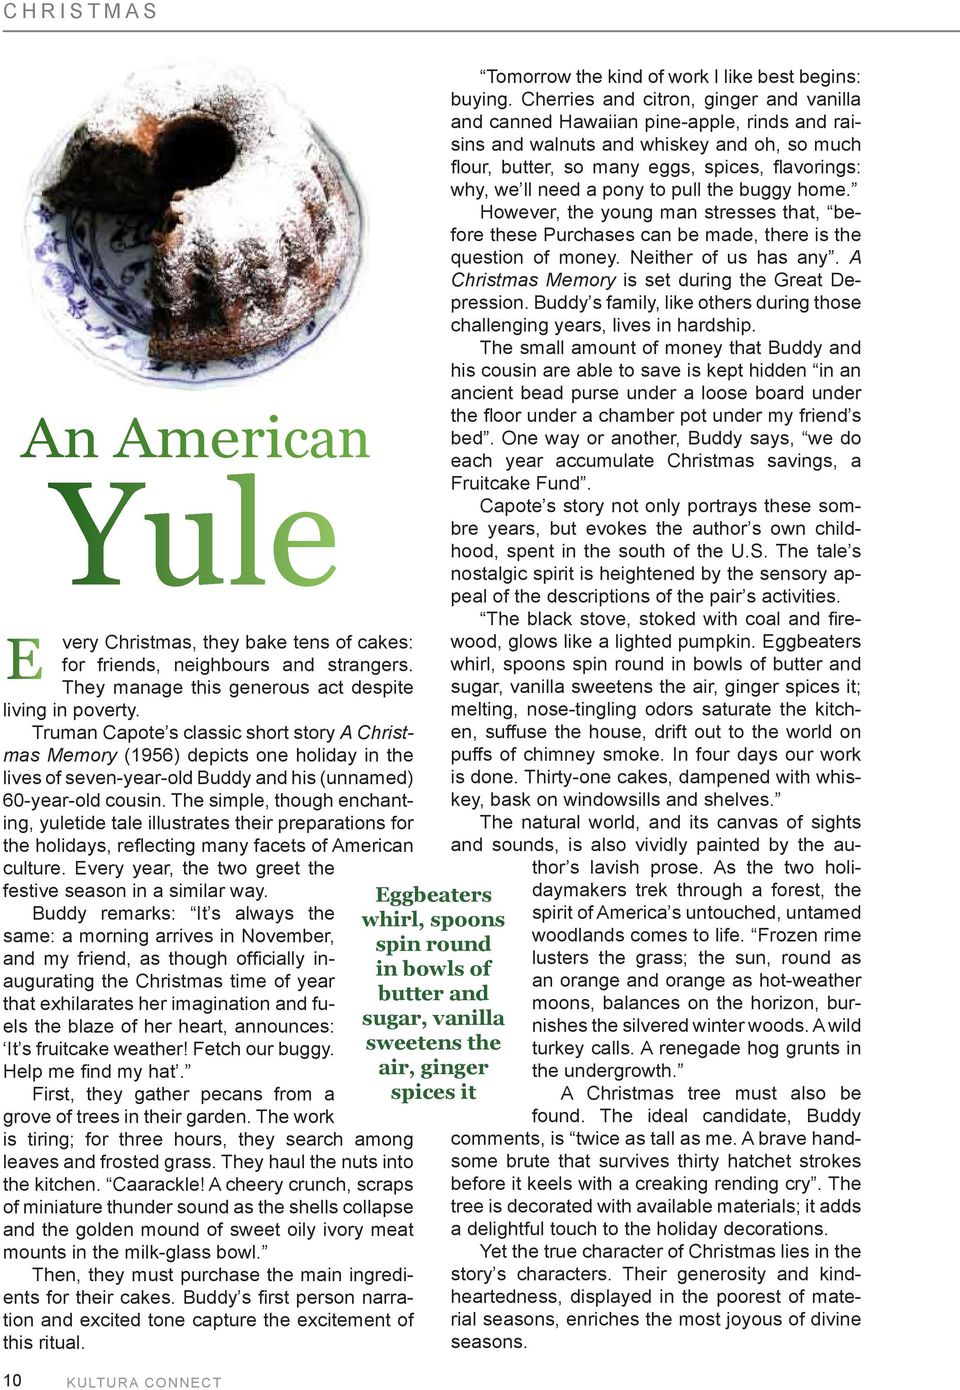 The simple, though enchanting, yuletide tale illustrates their preparations for the holidays, reflecting many facets of American culture. Every year, the two greet the festive season in a similar way.